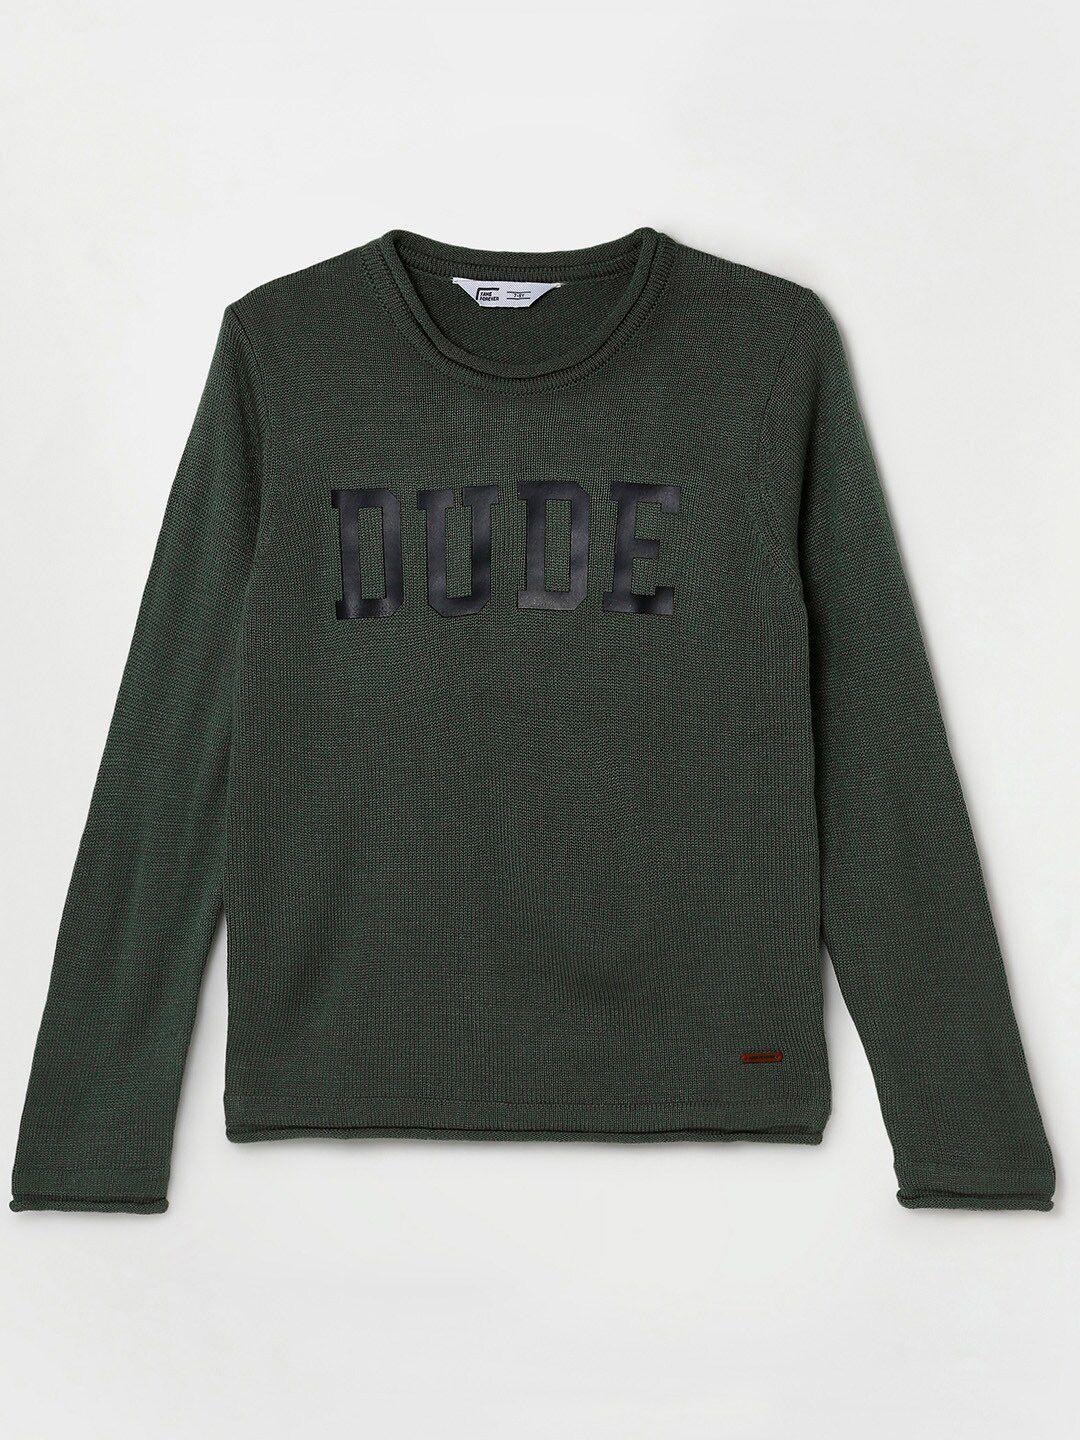 fame-forever-by-lifestyle-boys-olive-green-&-black-typography-printed-pullover-sweater